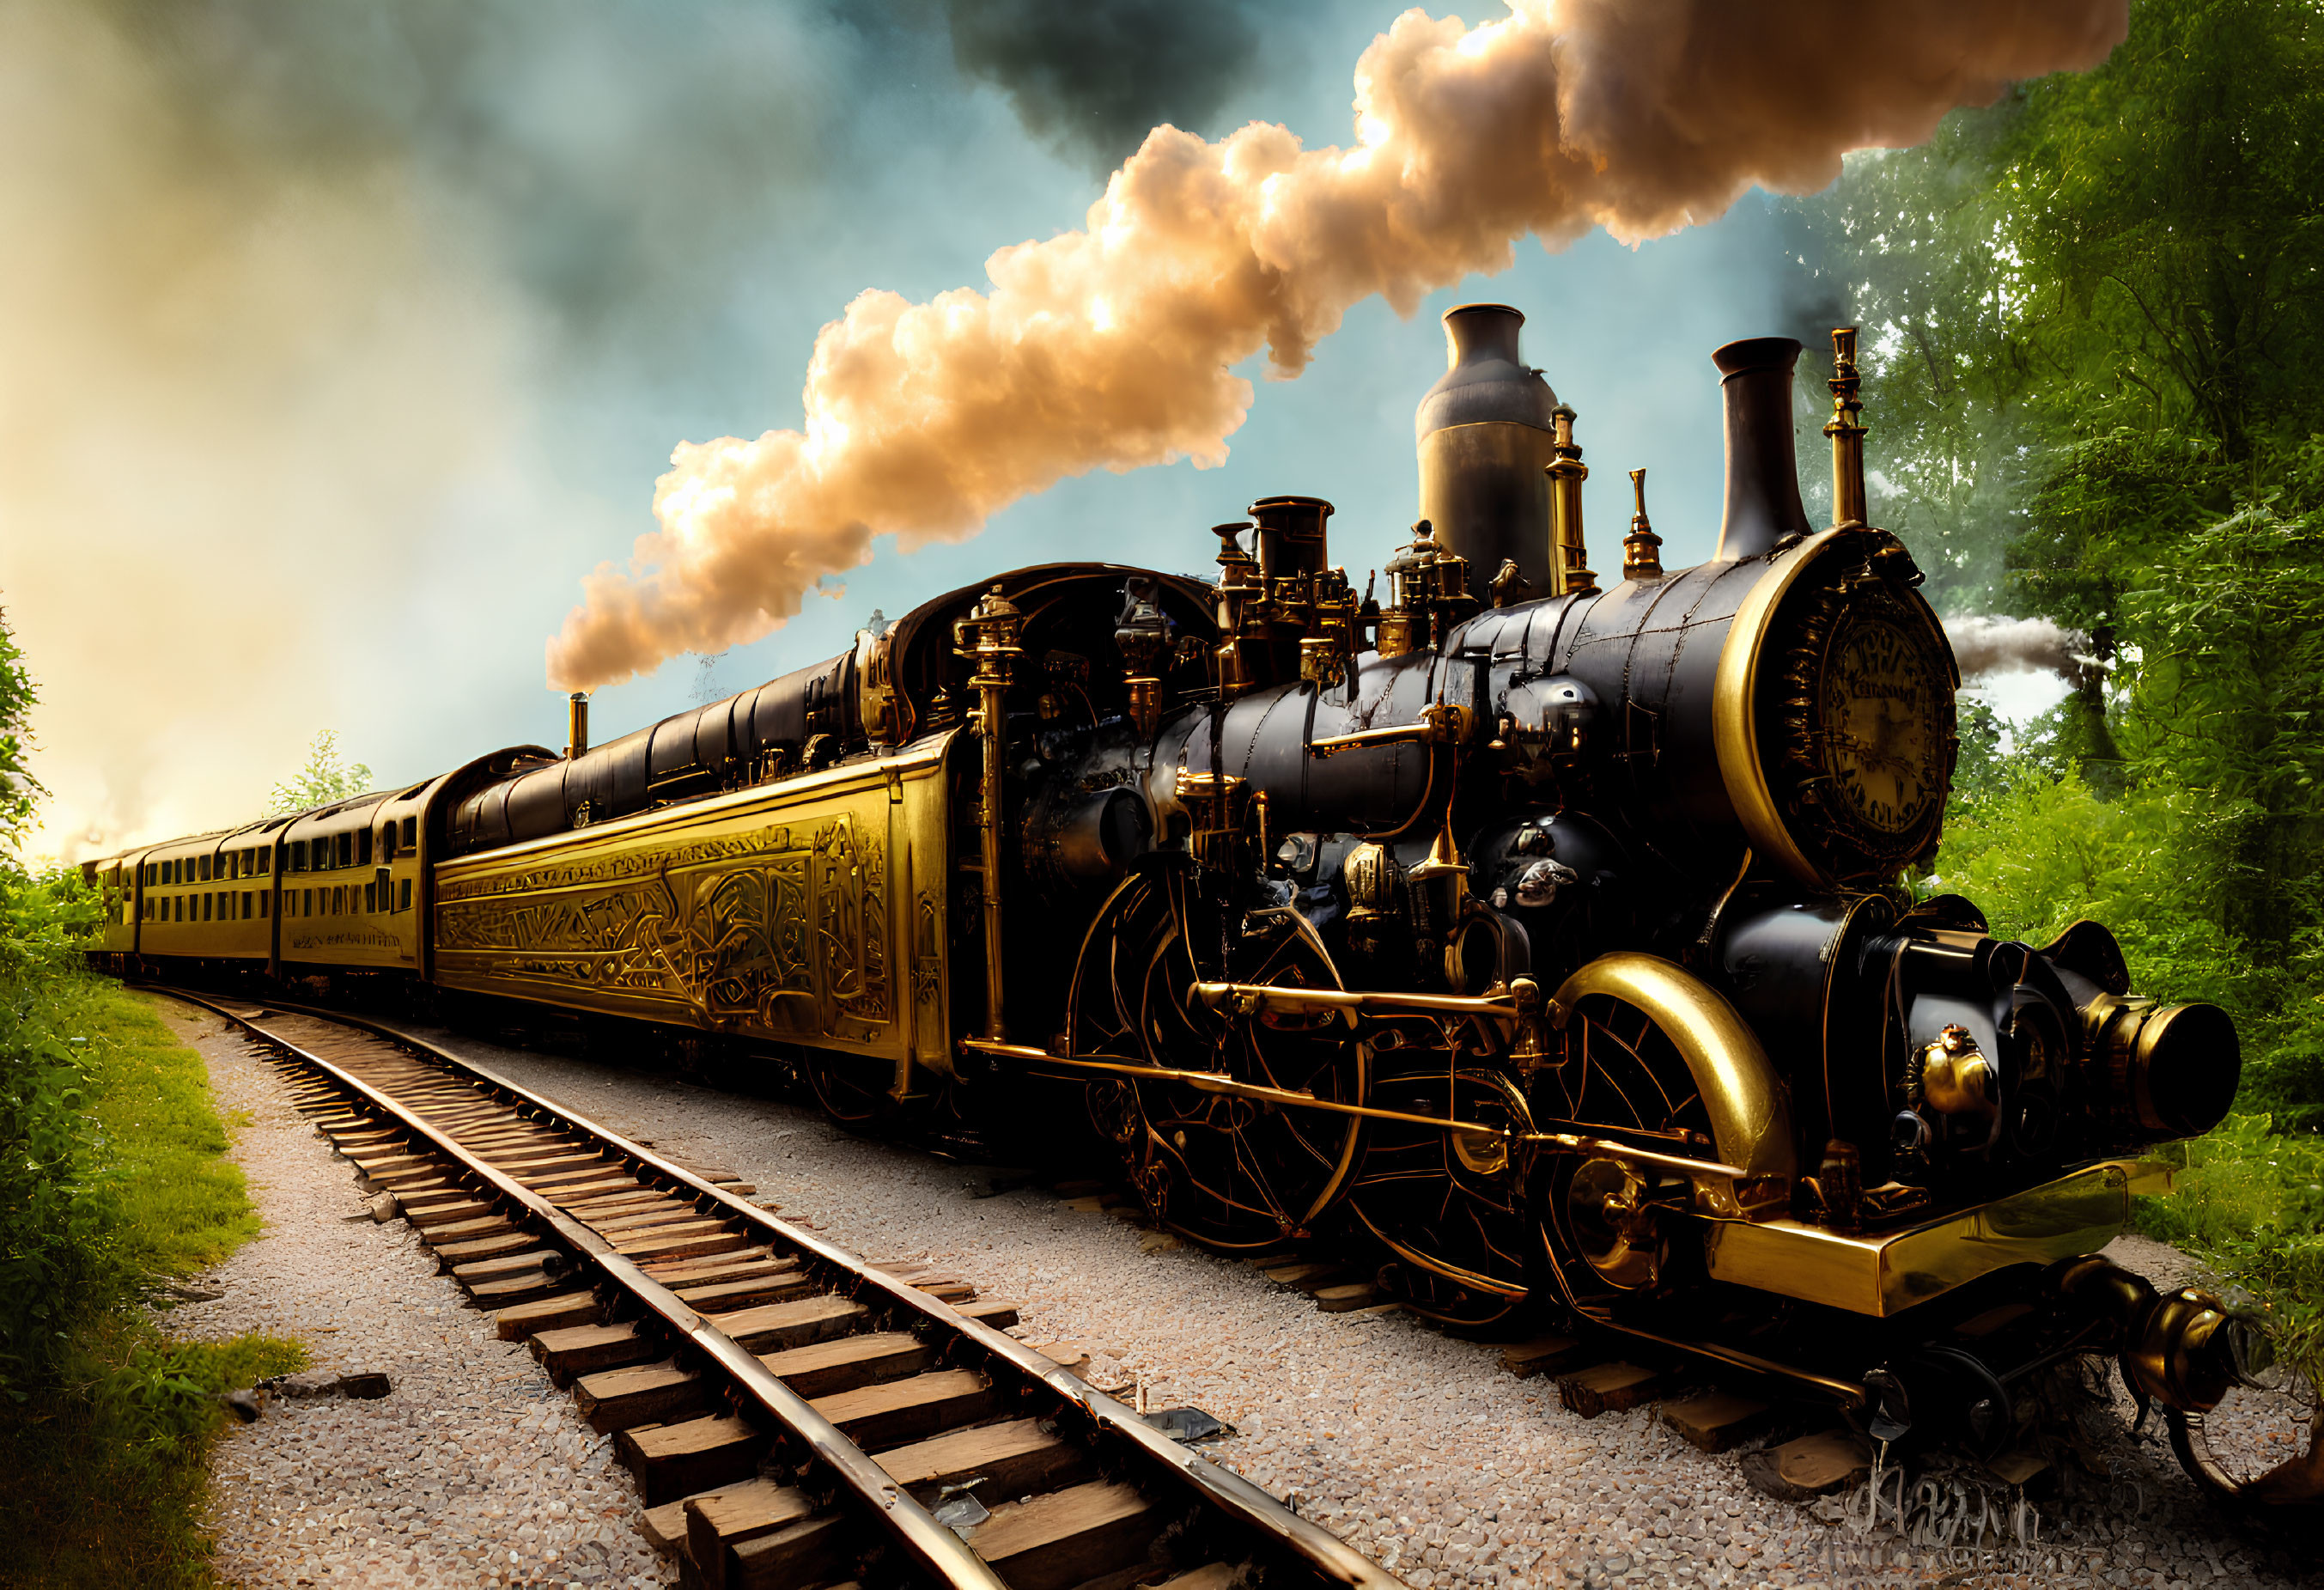 Vintage steam locomotive with golden trim in lush forest scenery